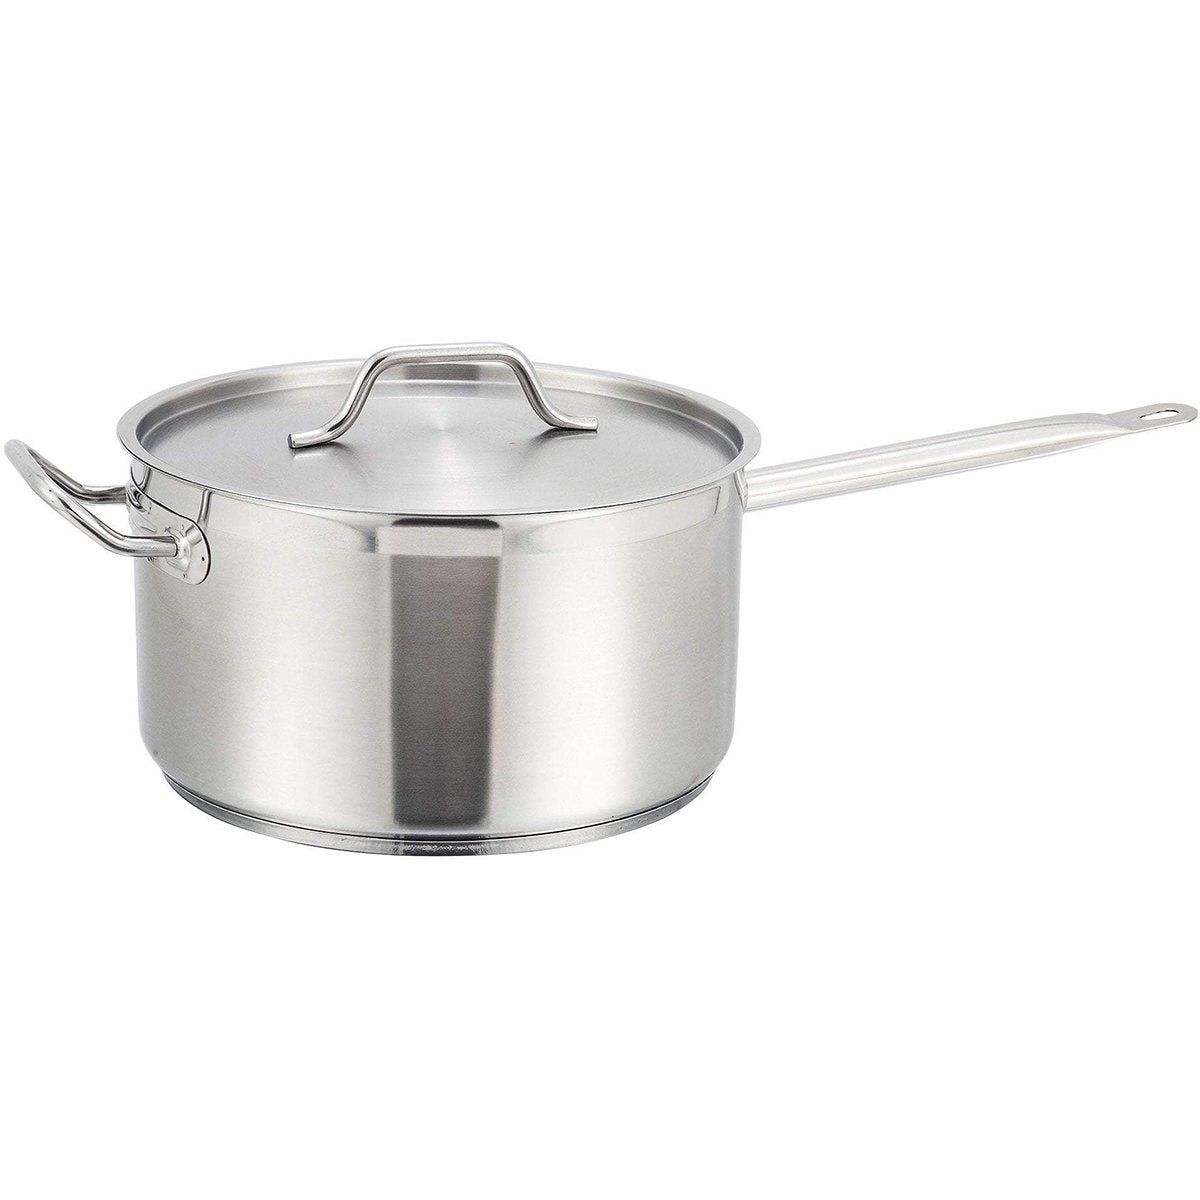 Professional Saucepan with Lid and Helper handle Stainless steel 9.8 litres Rental